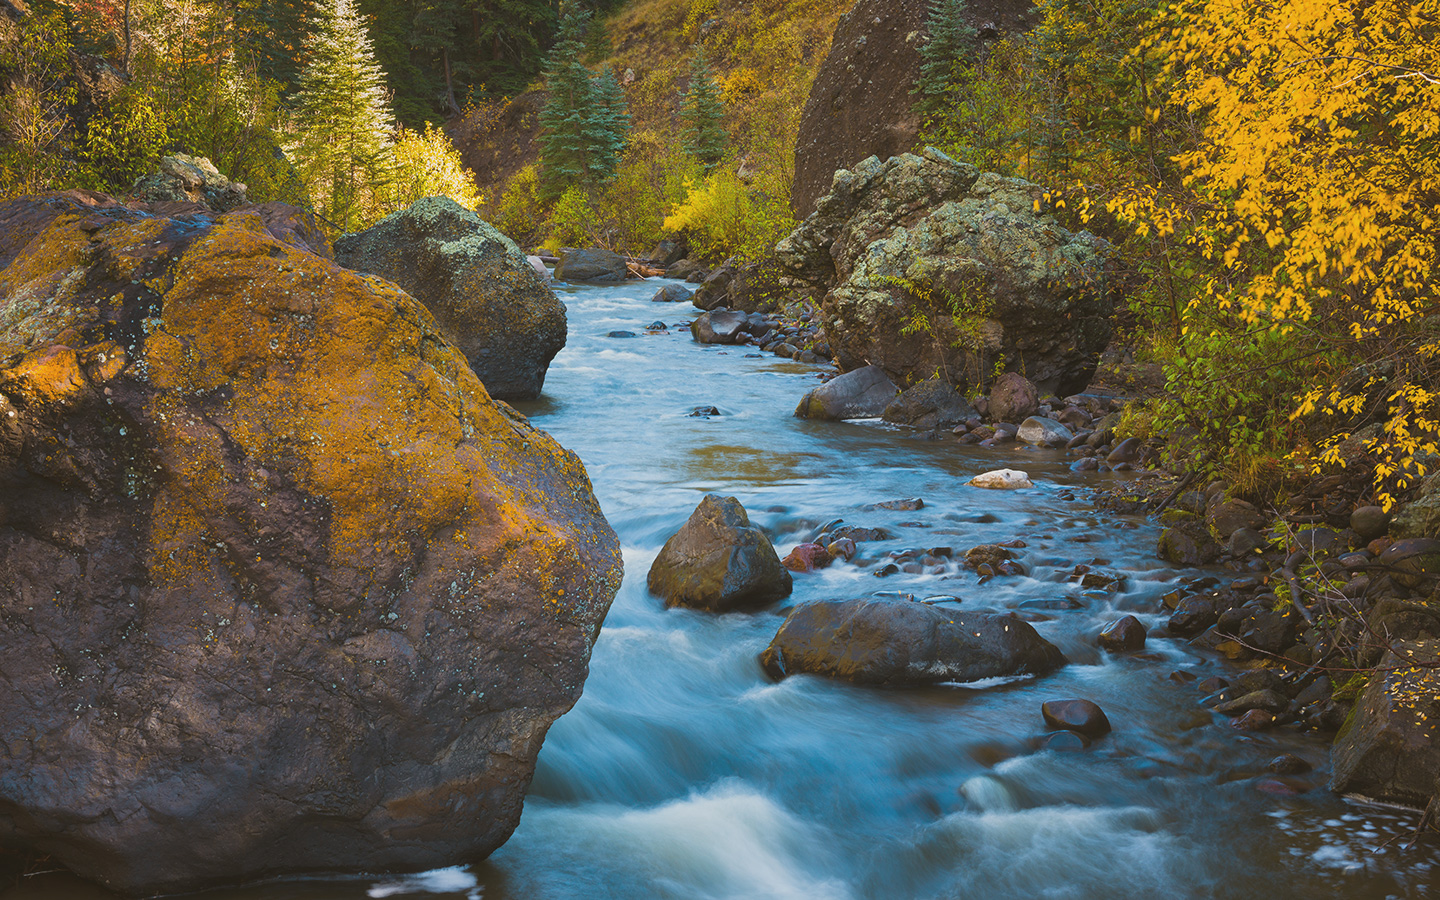 A stream on the Rancho del Oso Pardo shrouded in fall colors. Photo is by Adam Schallau.